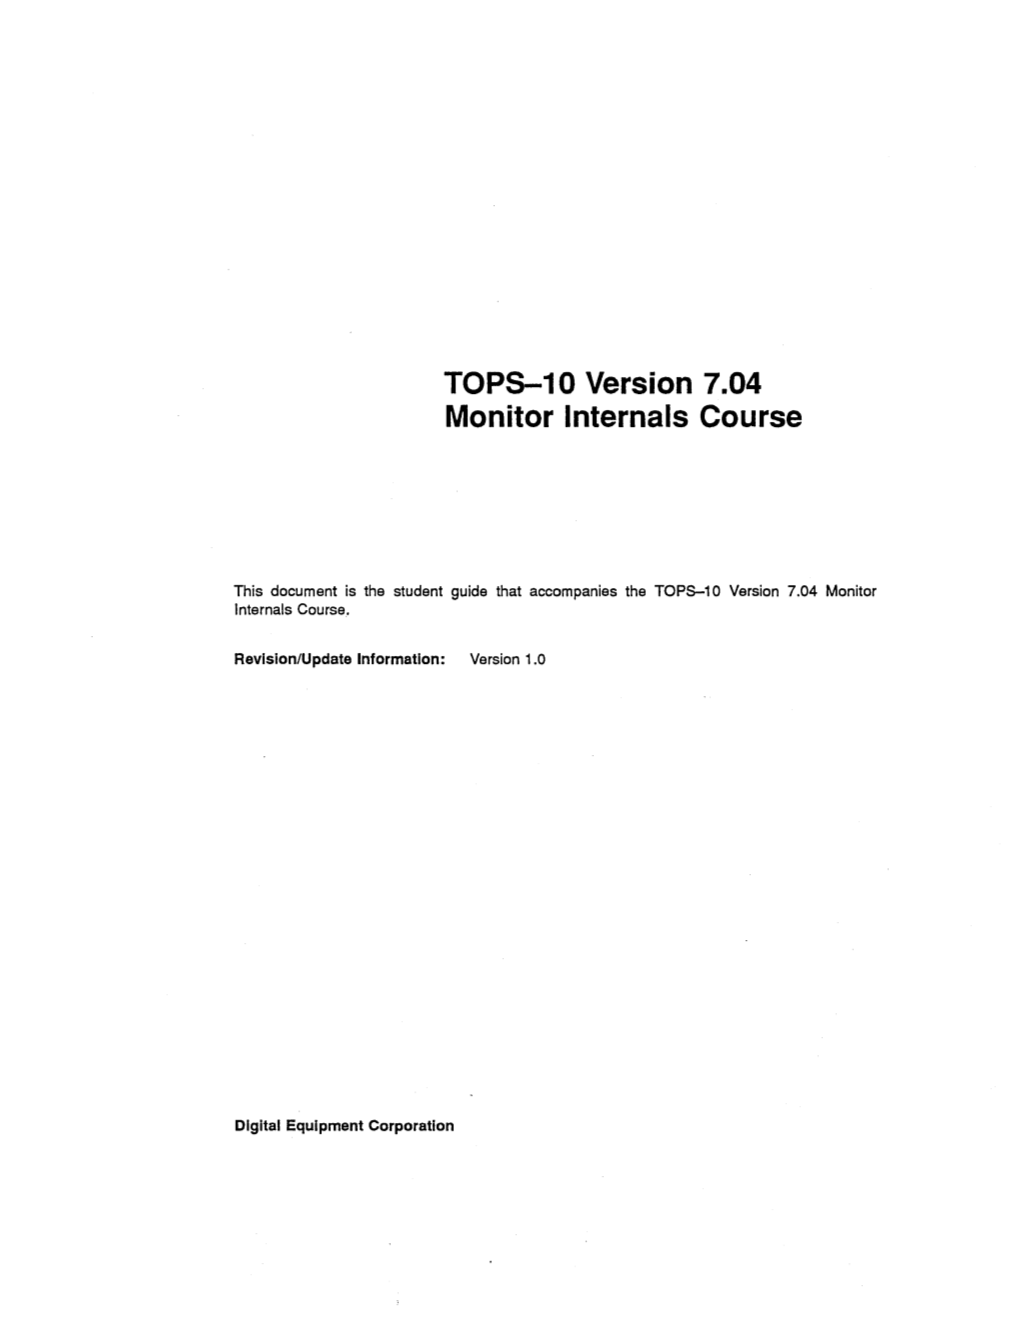 TOPS-10 Version 7.04 Monitor Internals Course